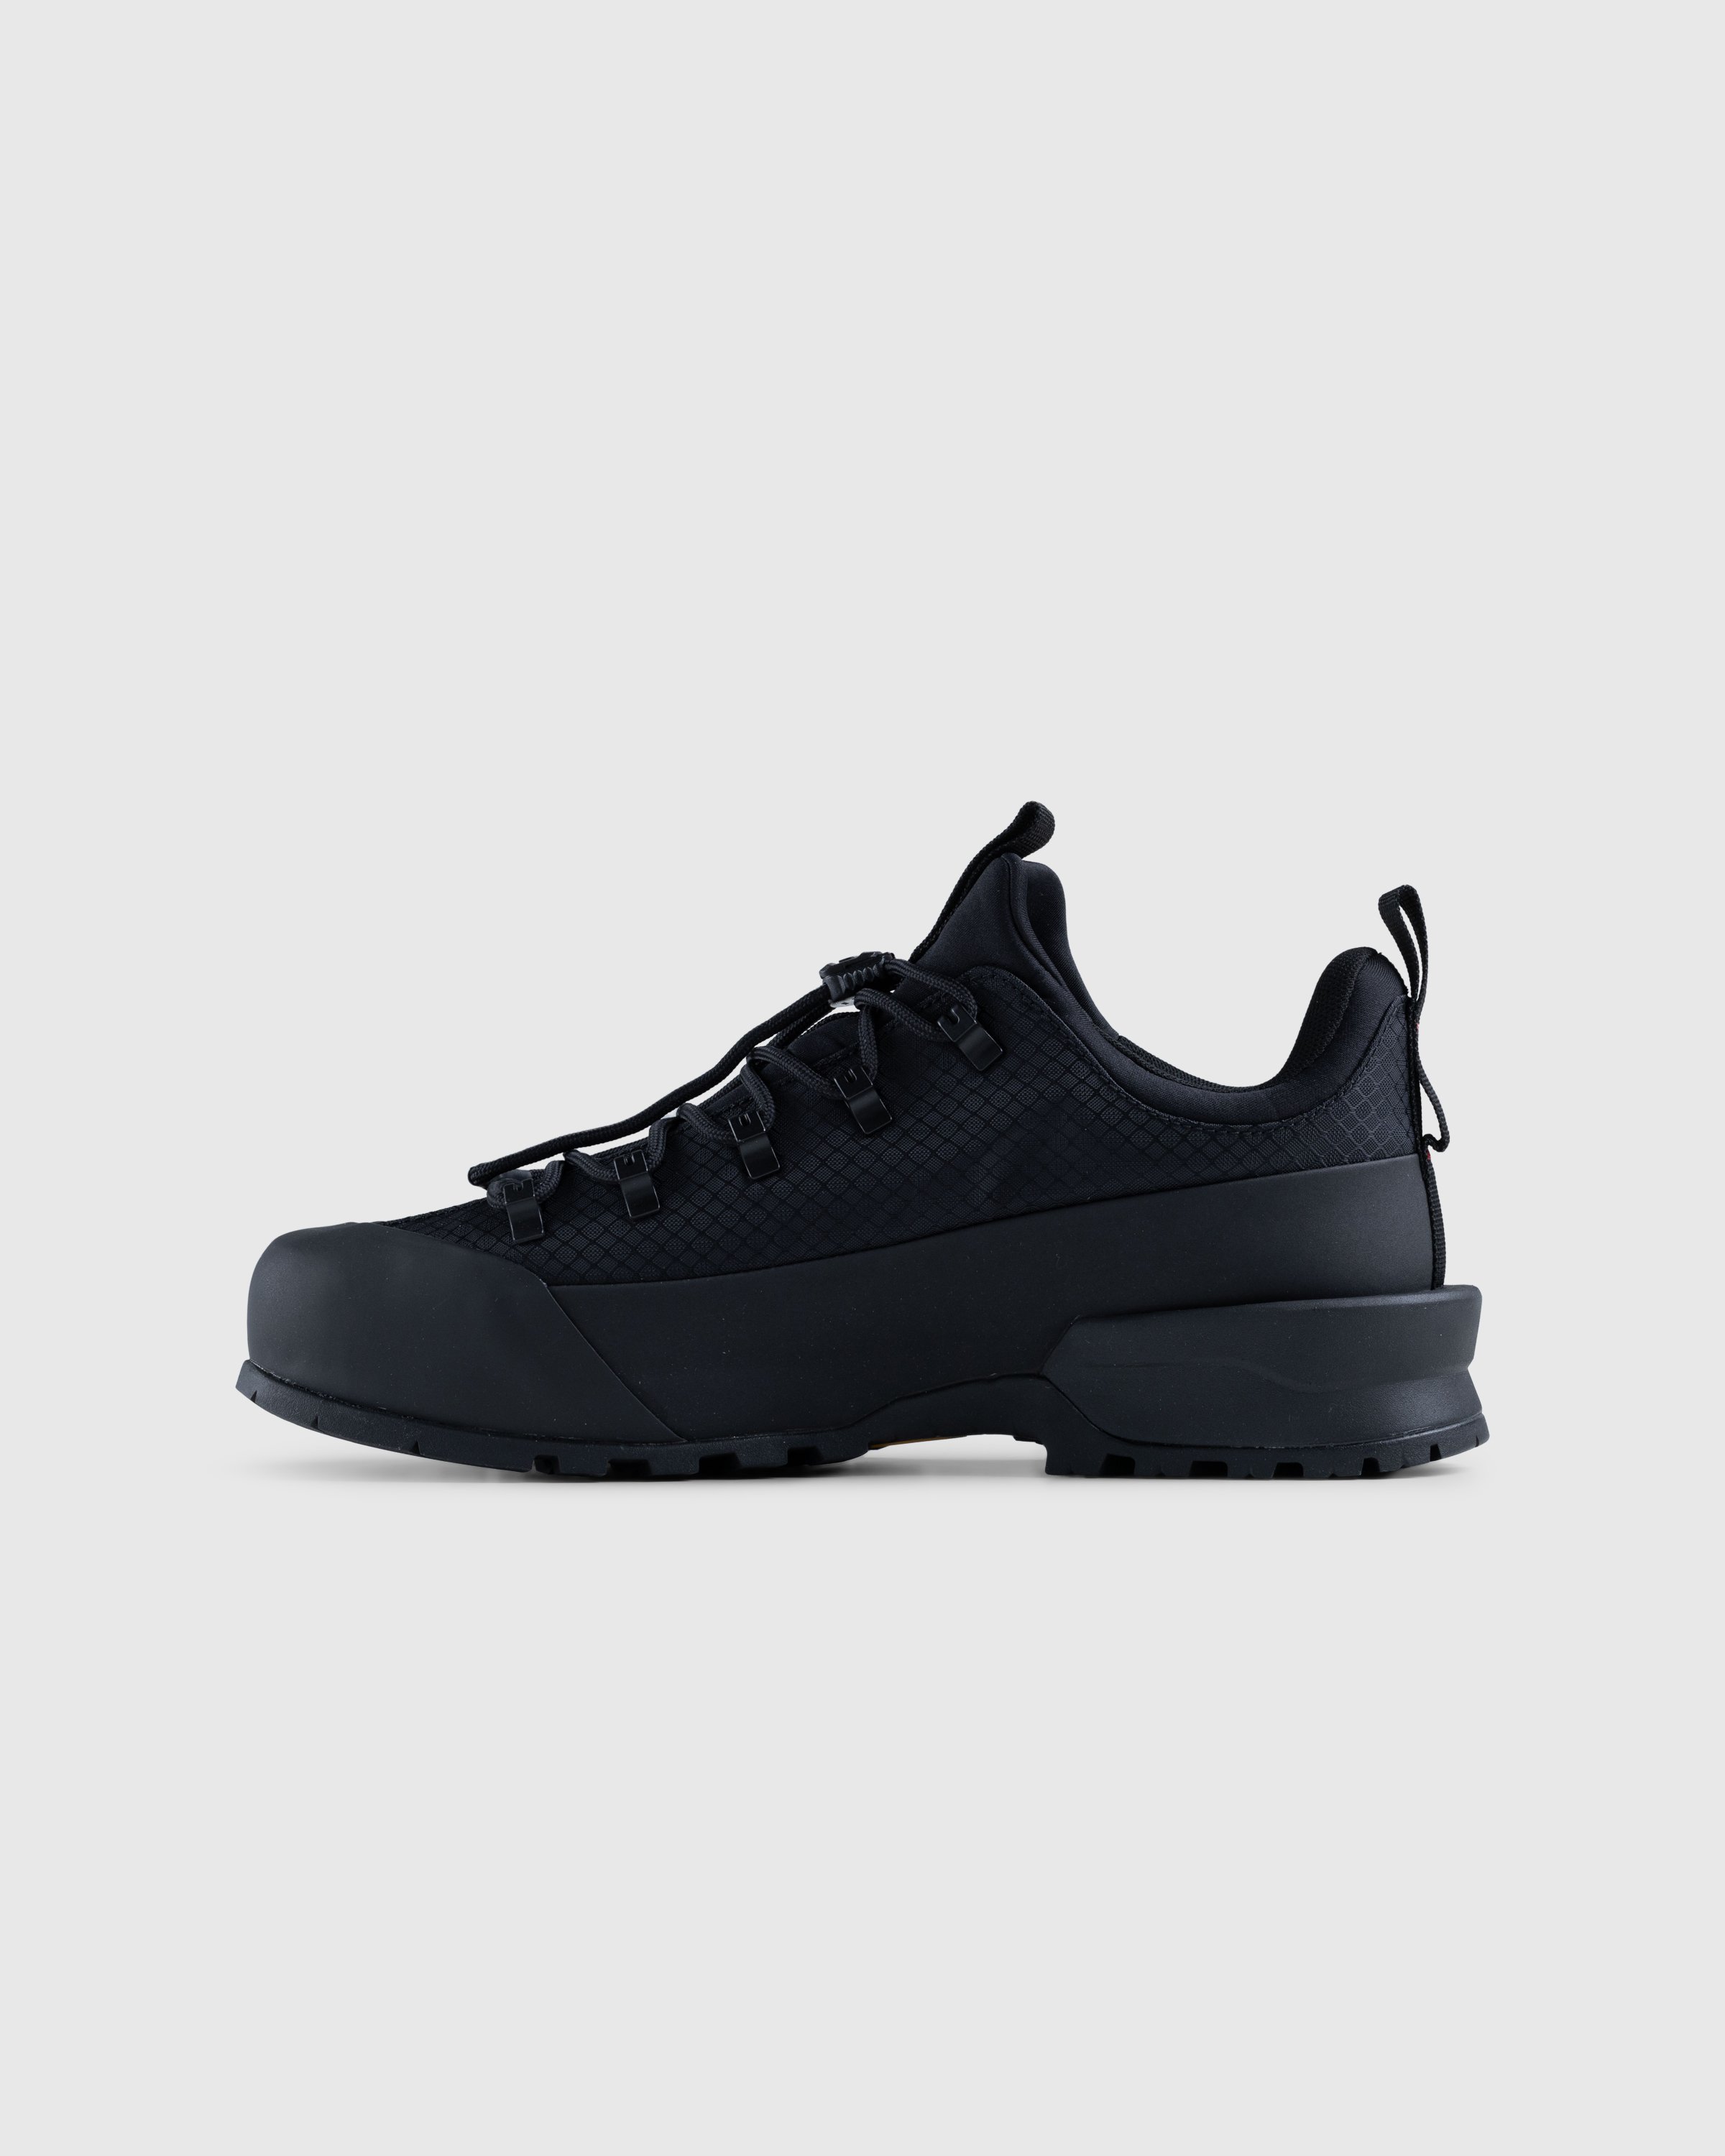 The North Face - Glenclyffe Low Black - Footwear - Black - Image 2